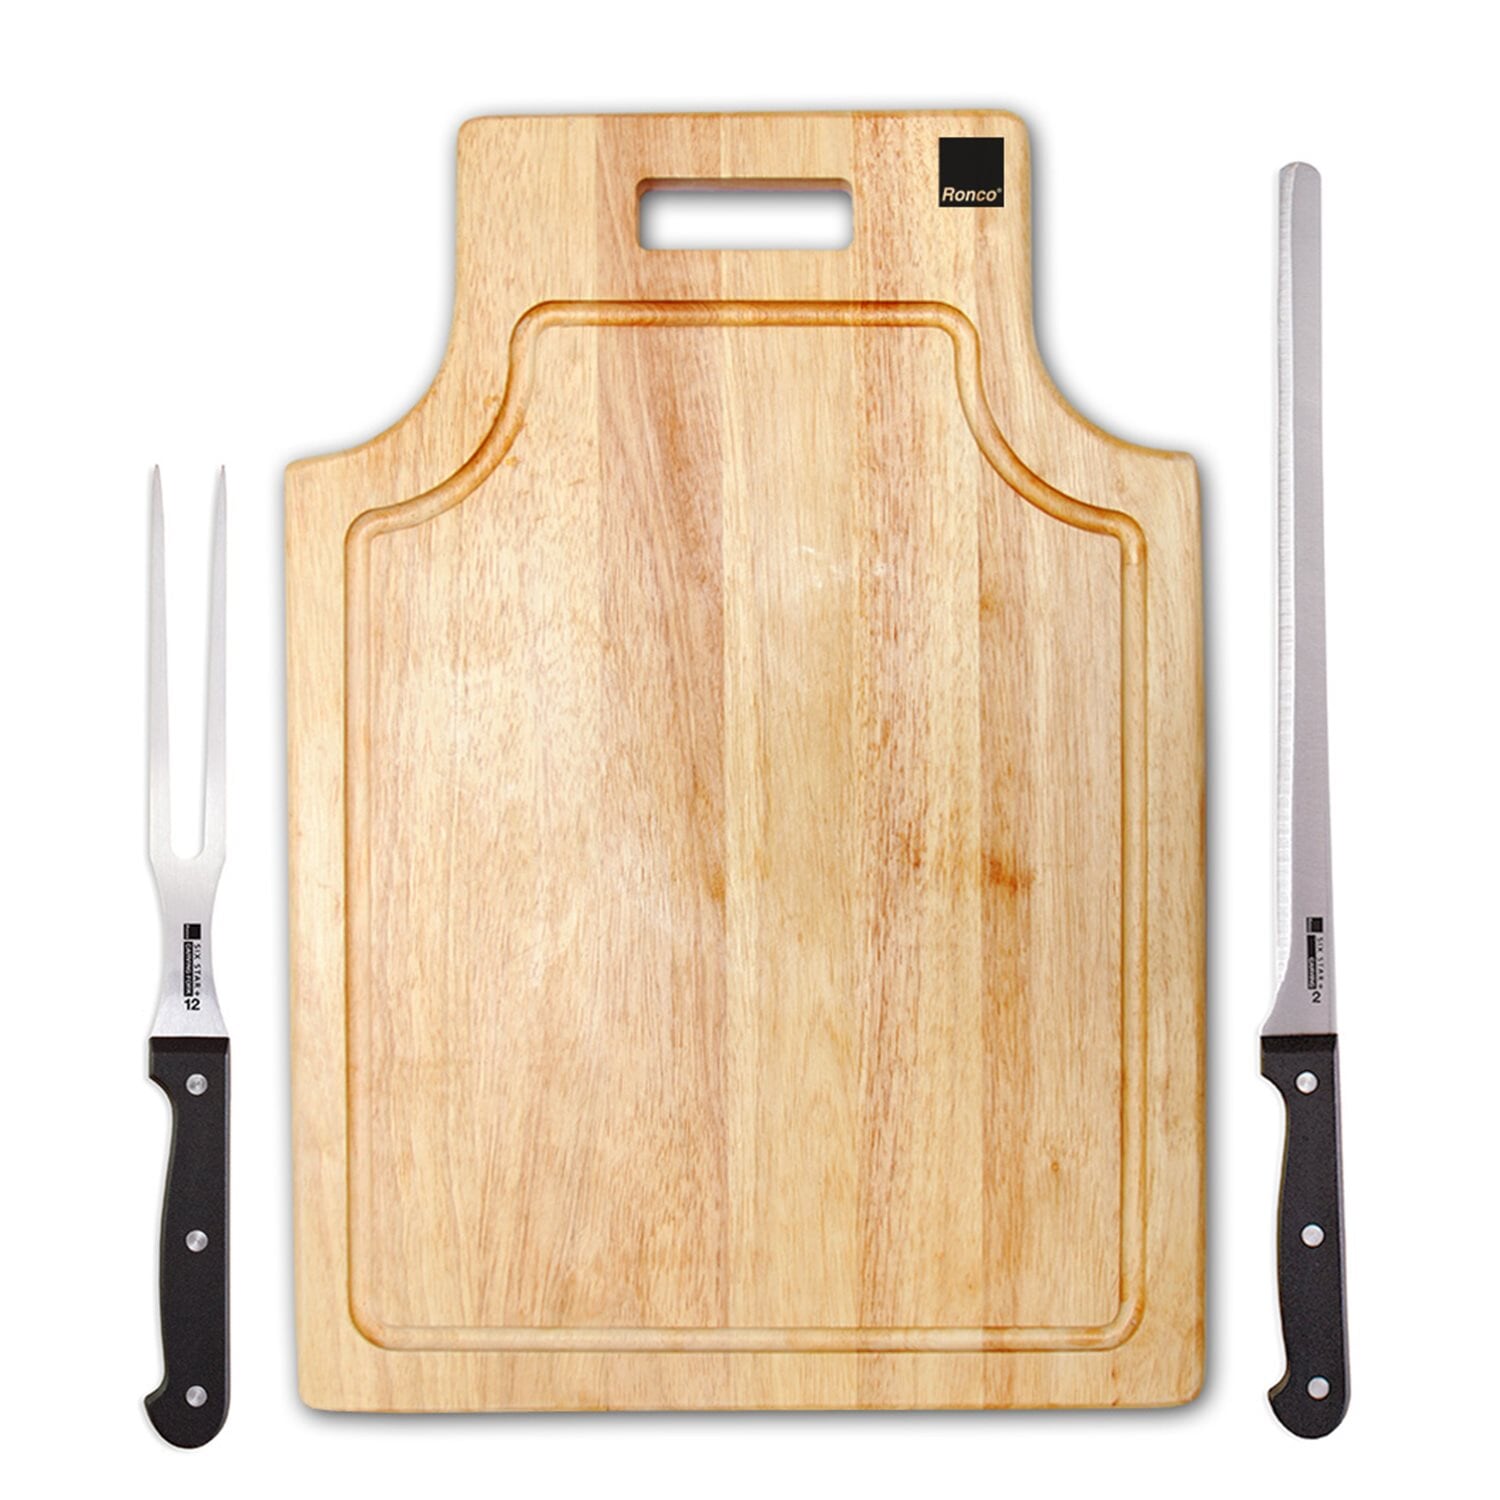 Ronco Carving Board Set with Drip Catch